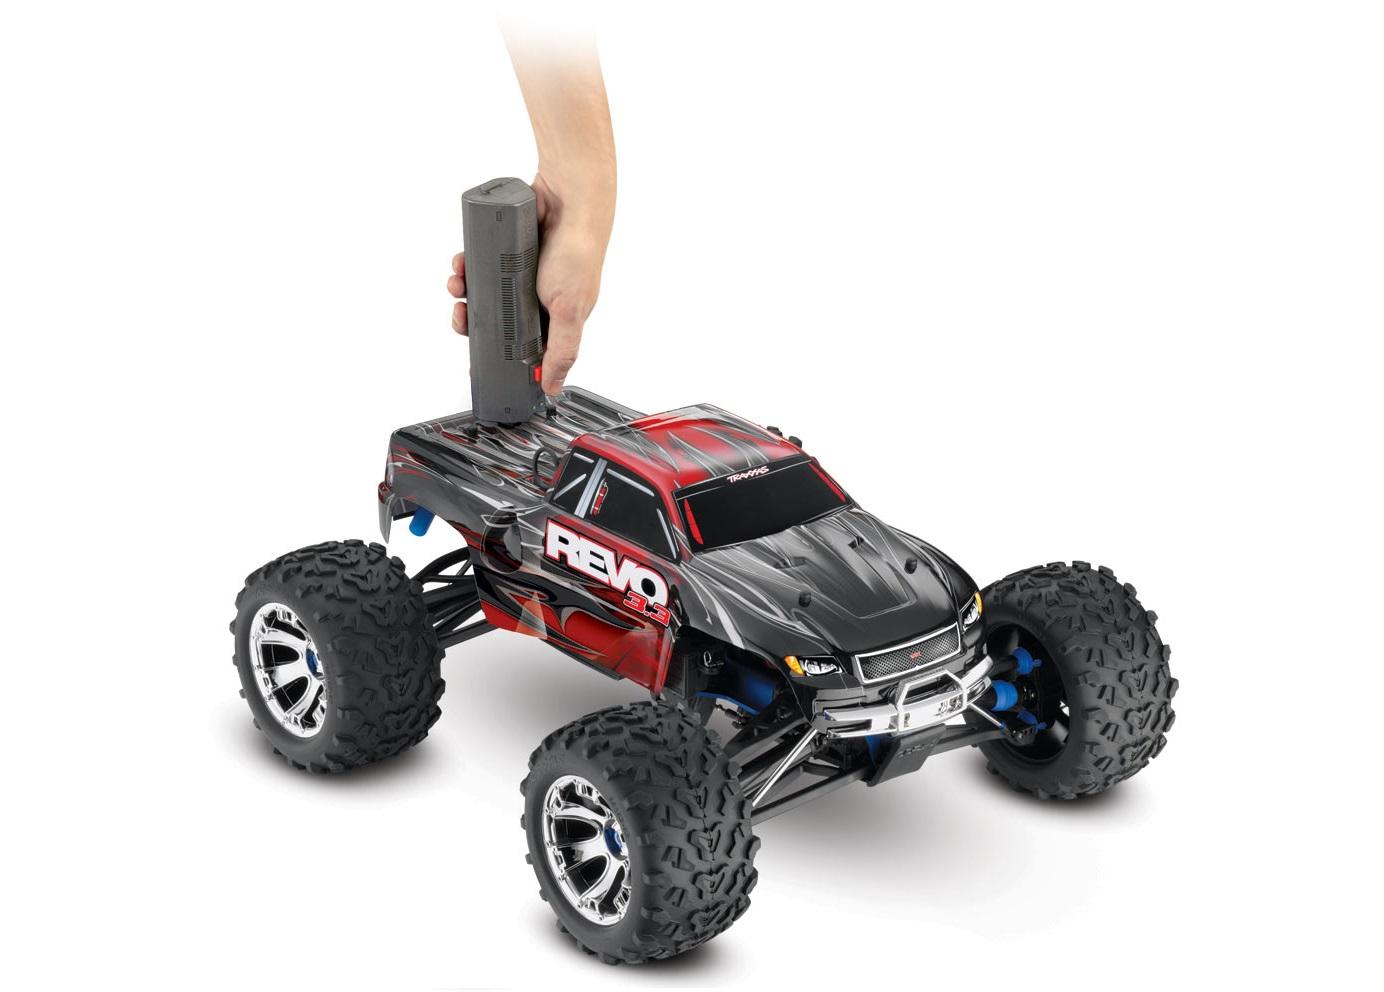 Traxxas Rc Cars For Sale Cheap: Factors to Consider When Buying a Used Traxxas RC Car